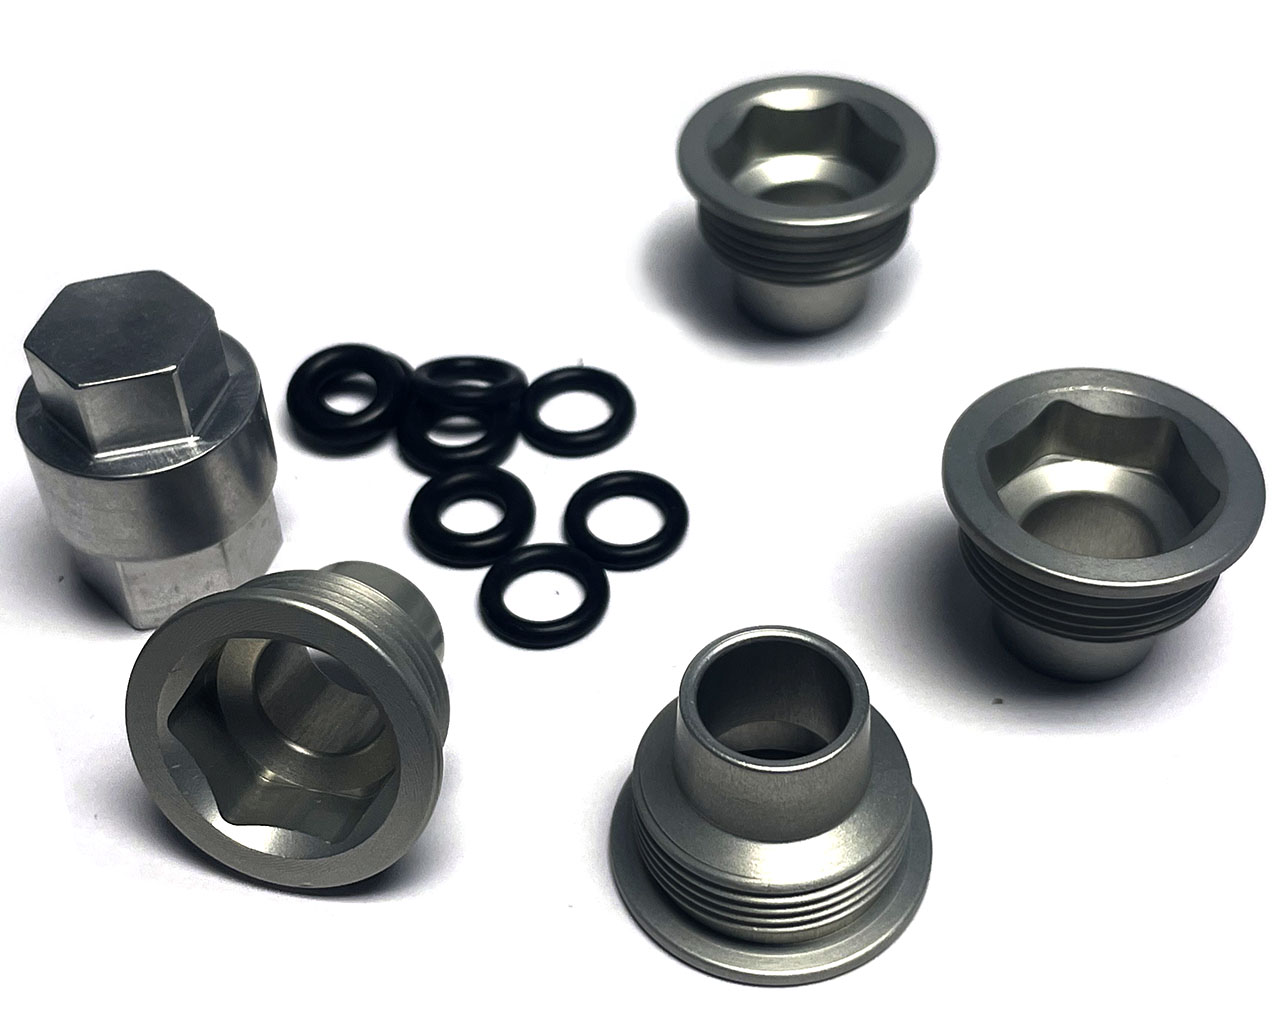 Billet Injector Cups (1.8T small port)